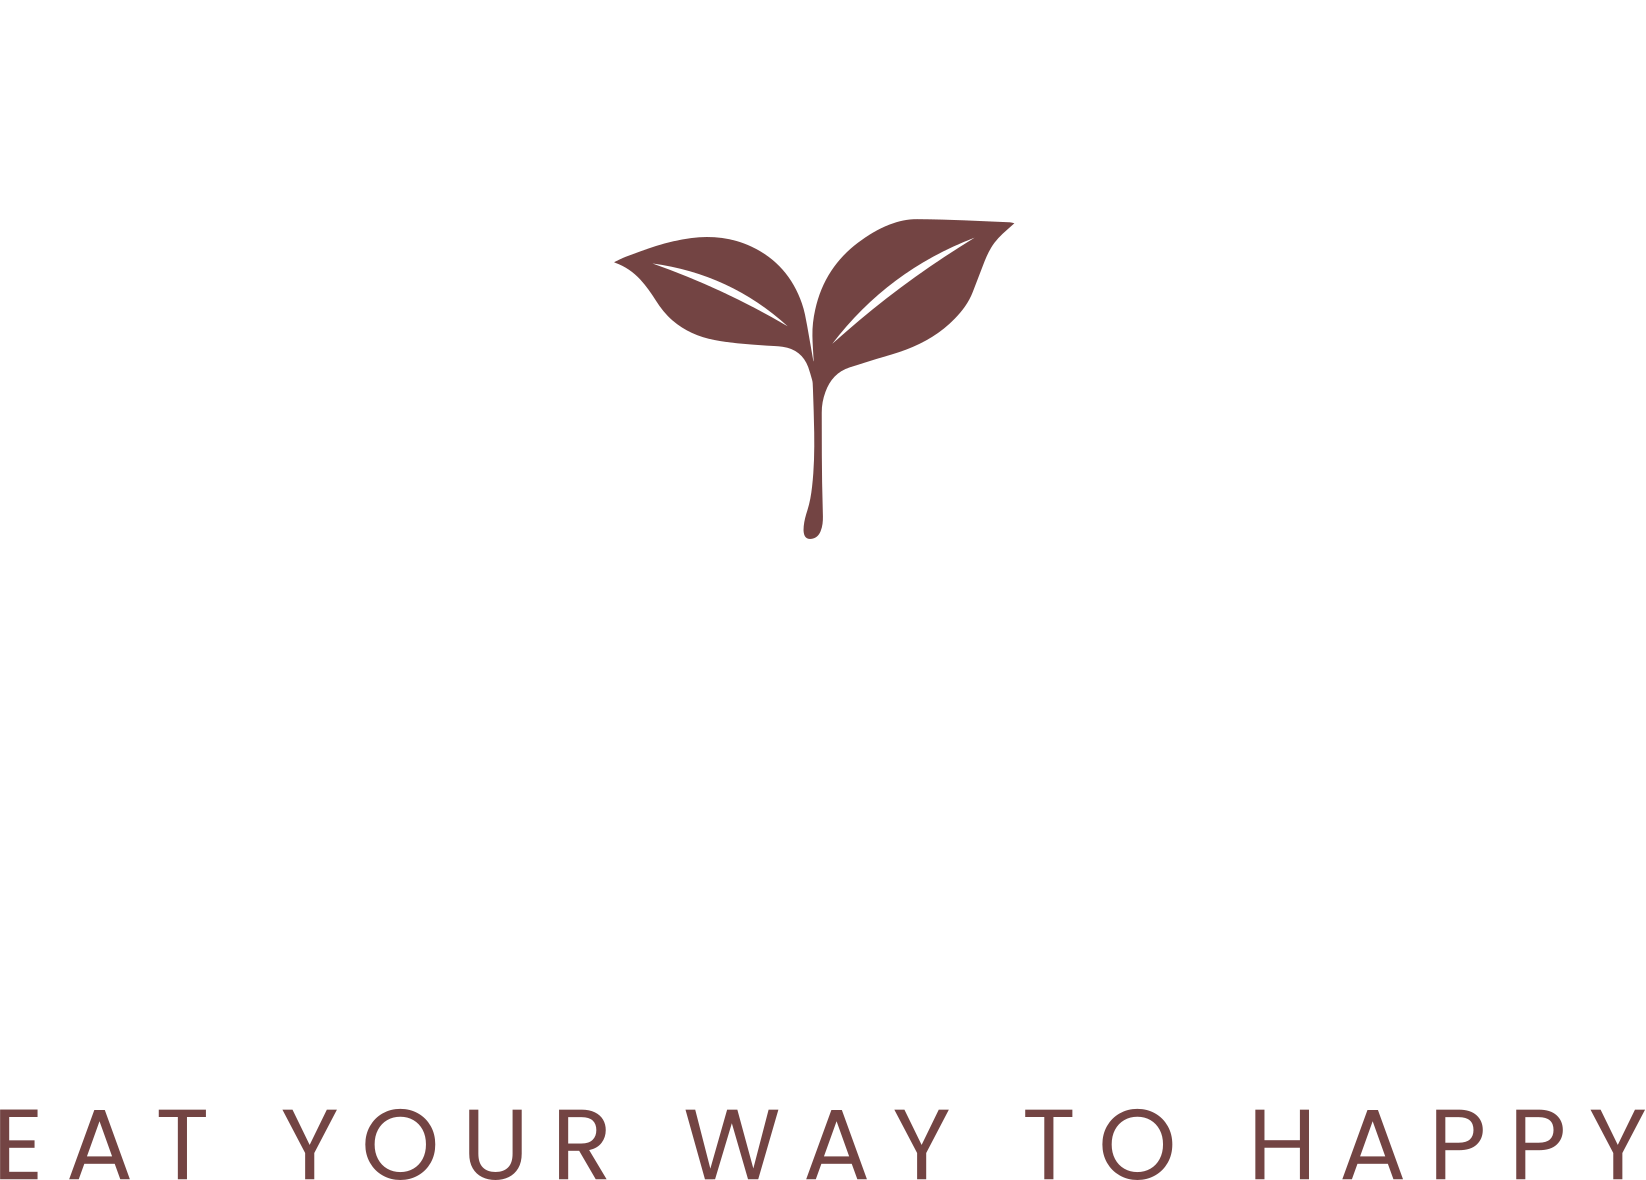 Transition Nutrition - Eat Your Way To Happy